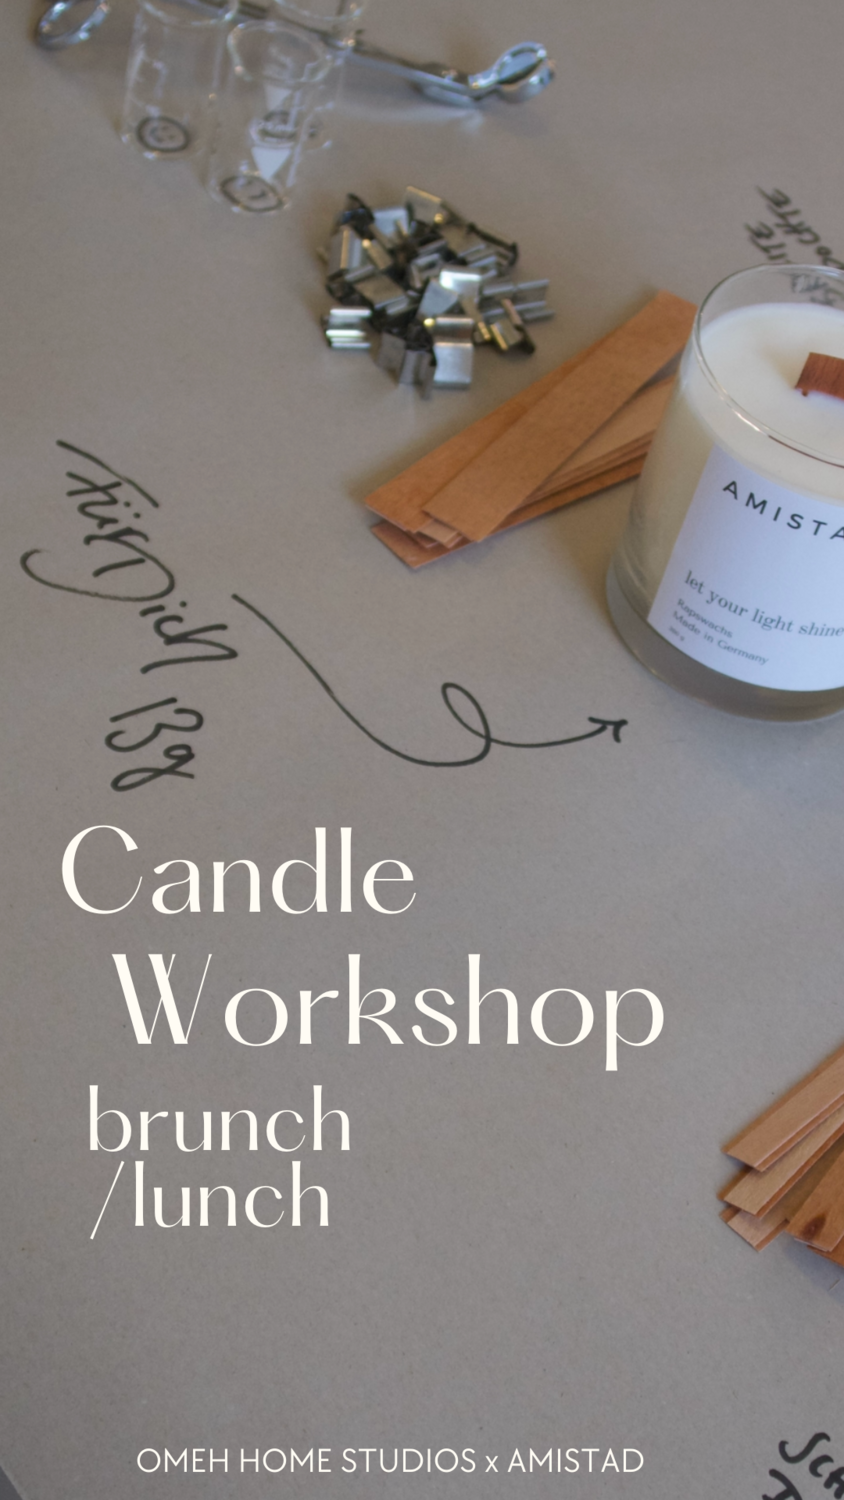 Candle Workshop with Brunch 12.3